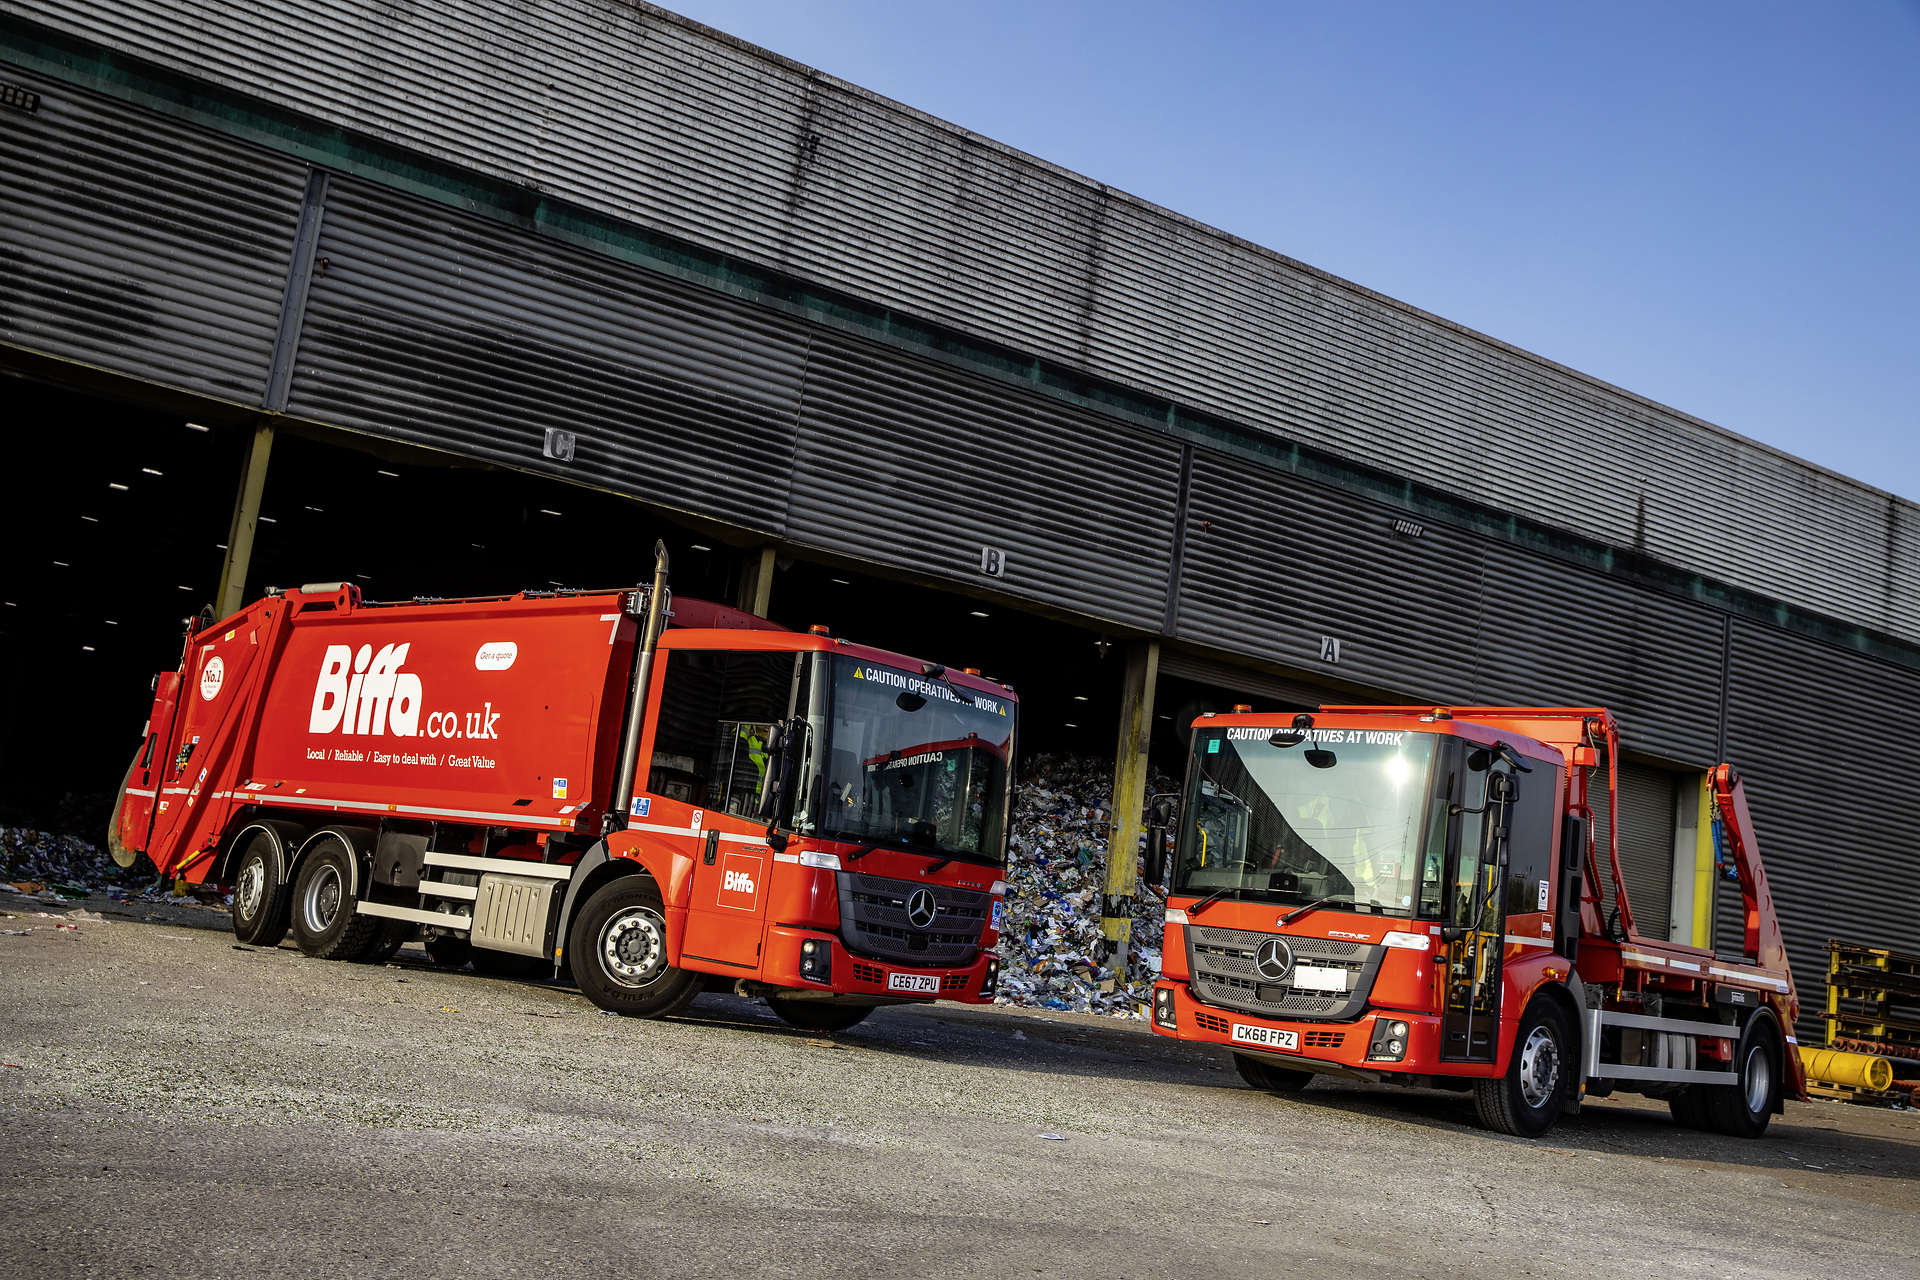 43 new Mercedes-Benz Econic trucks equipped with new body variants for the UK